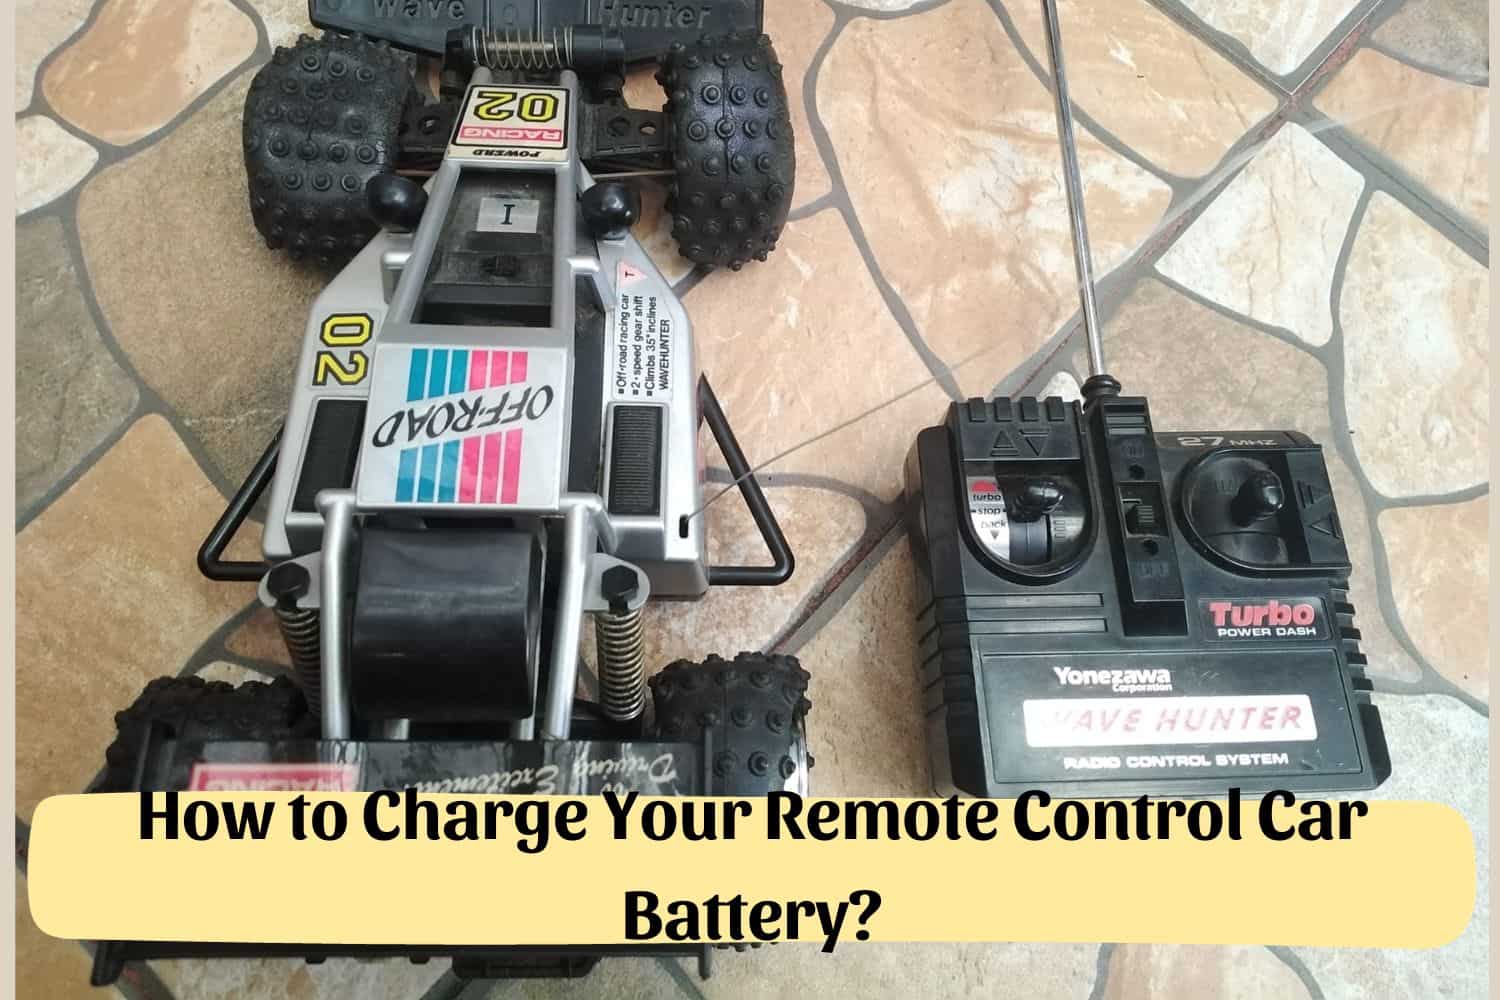 How to Charge Your Remote Control Car Battery?